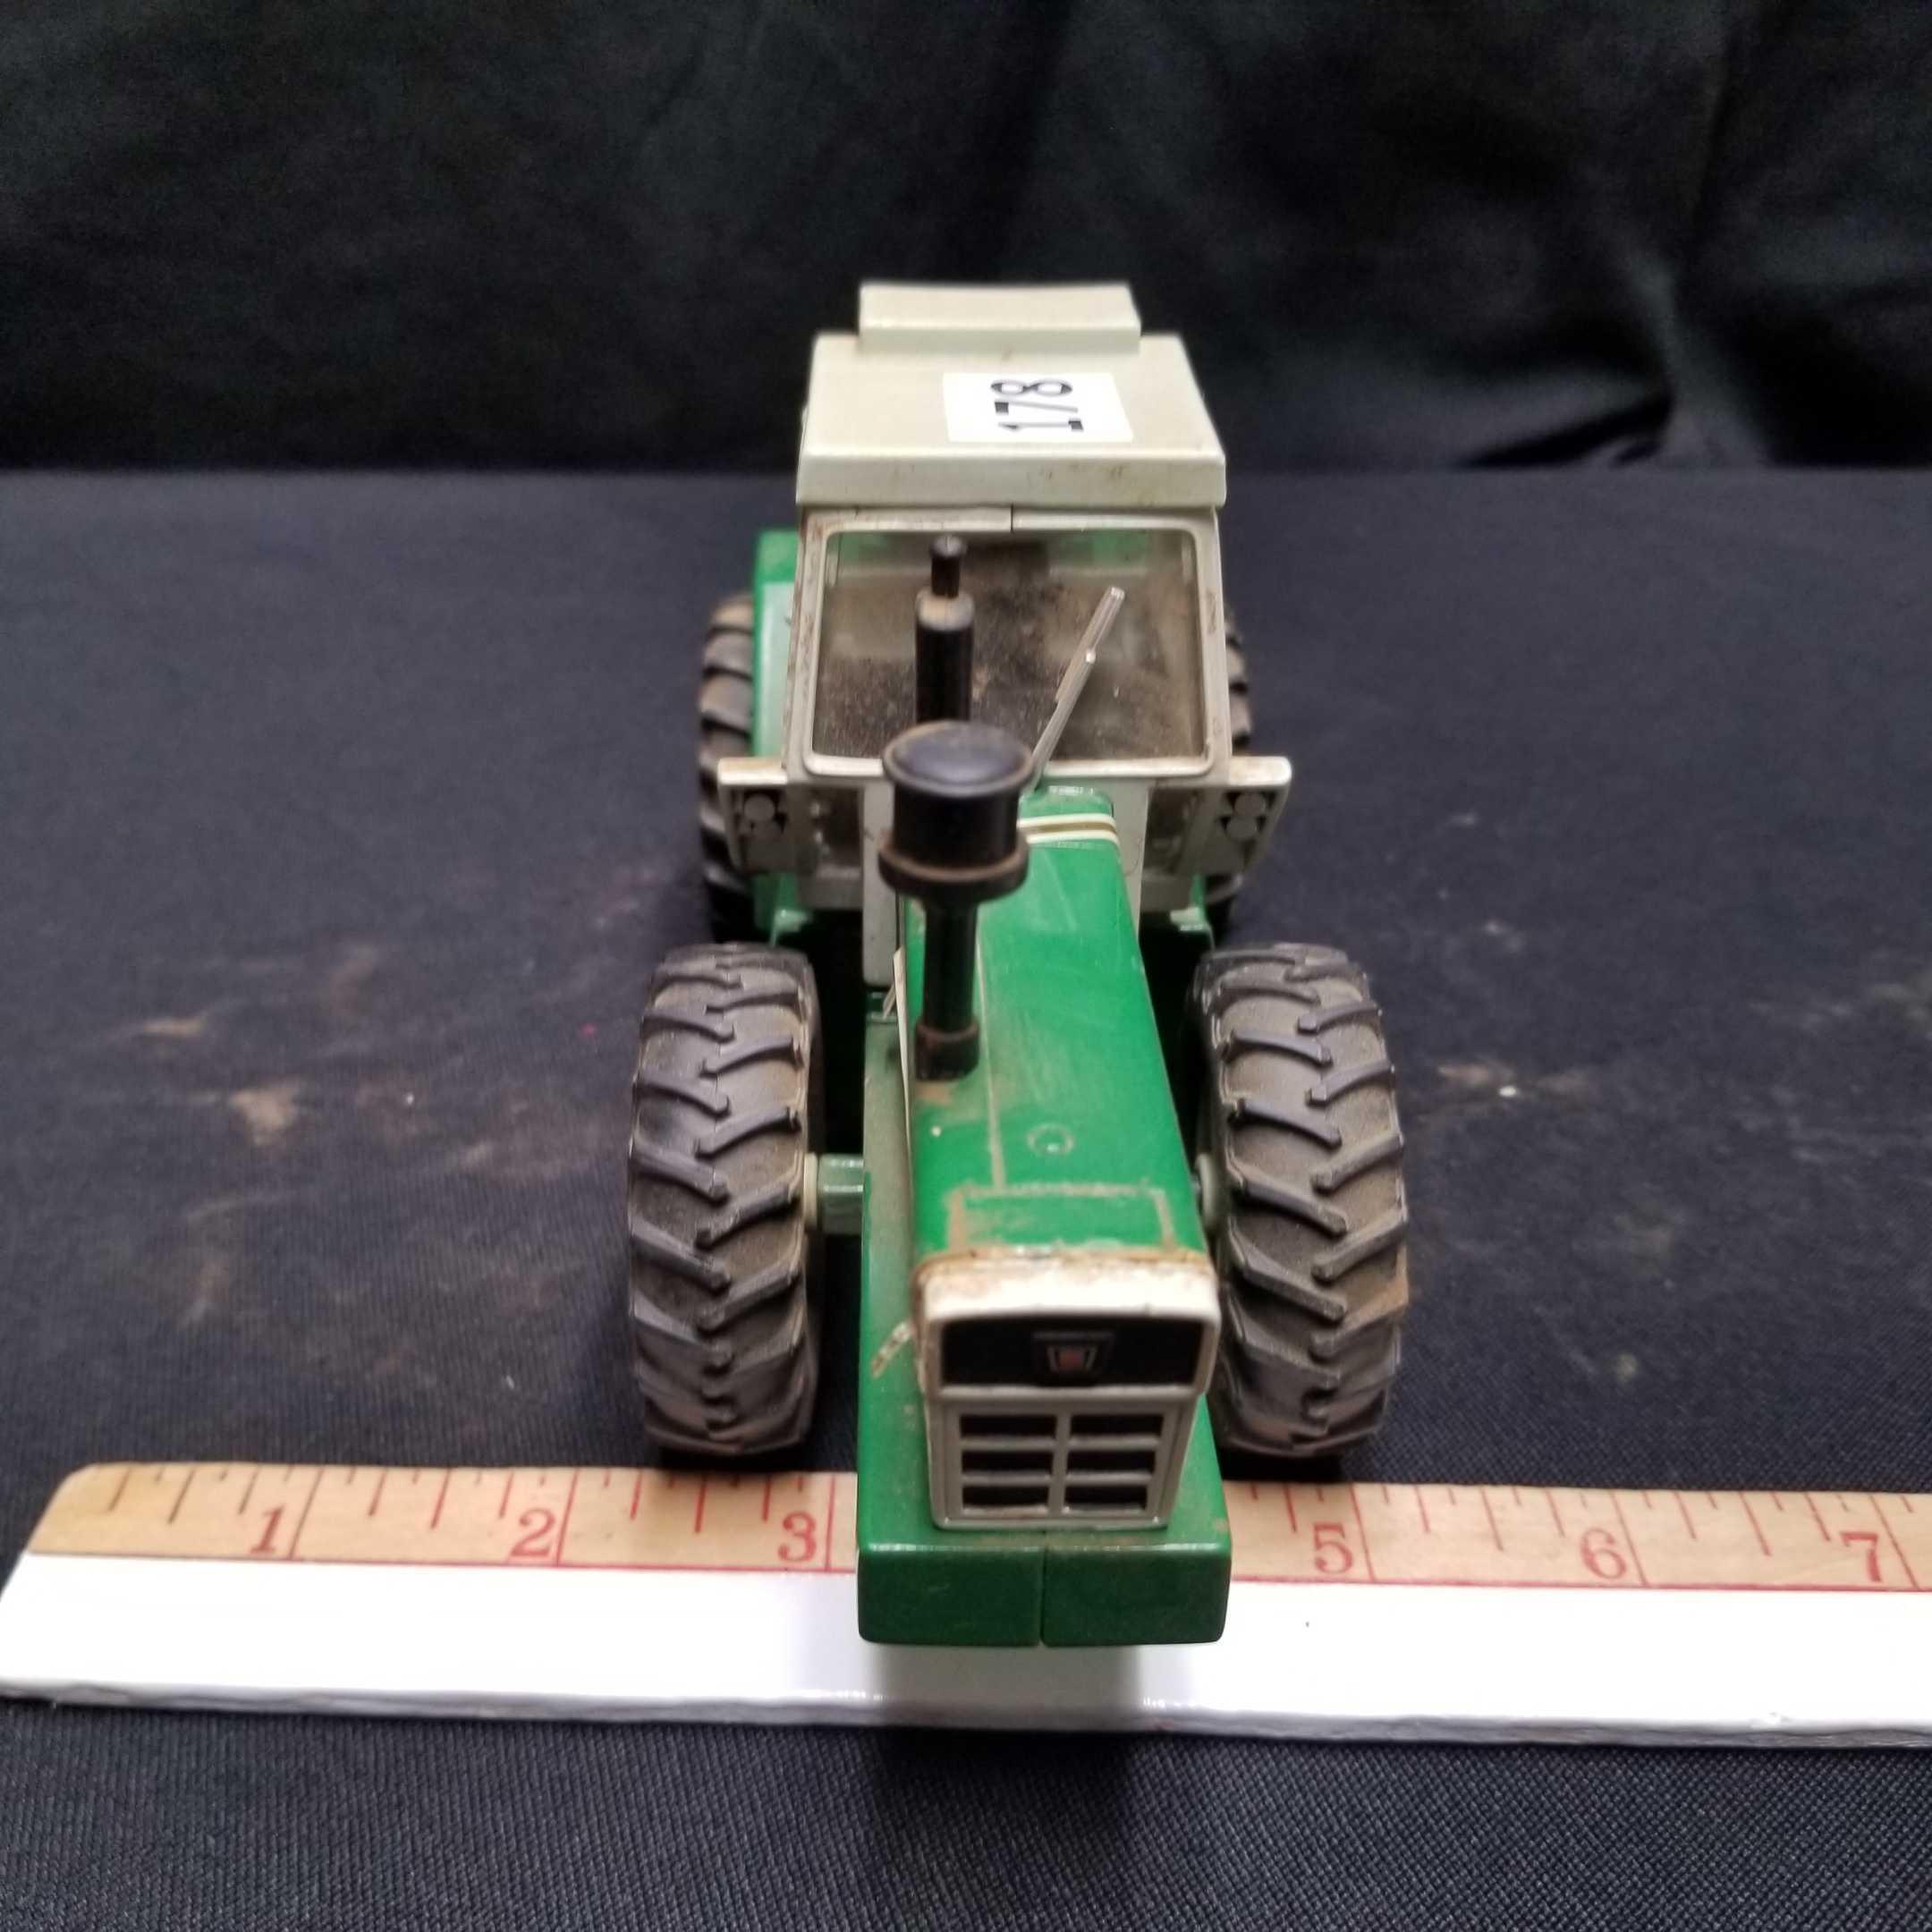 1/32nd Scale OLIVER "2655" TRACTOR 4WD SINGLES BARE BACK